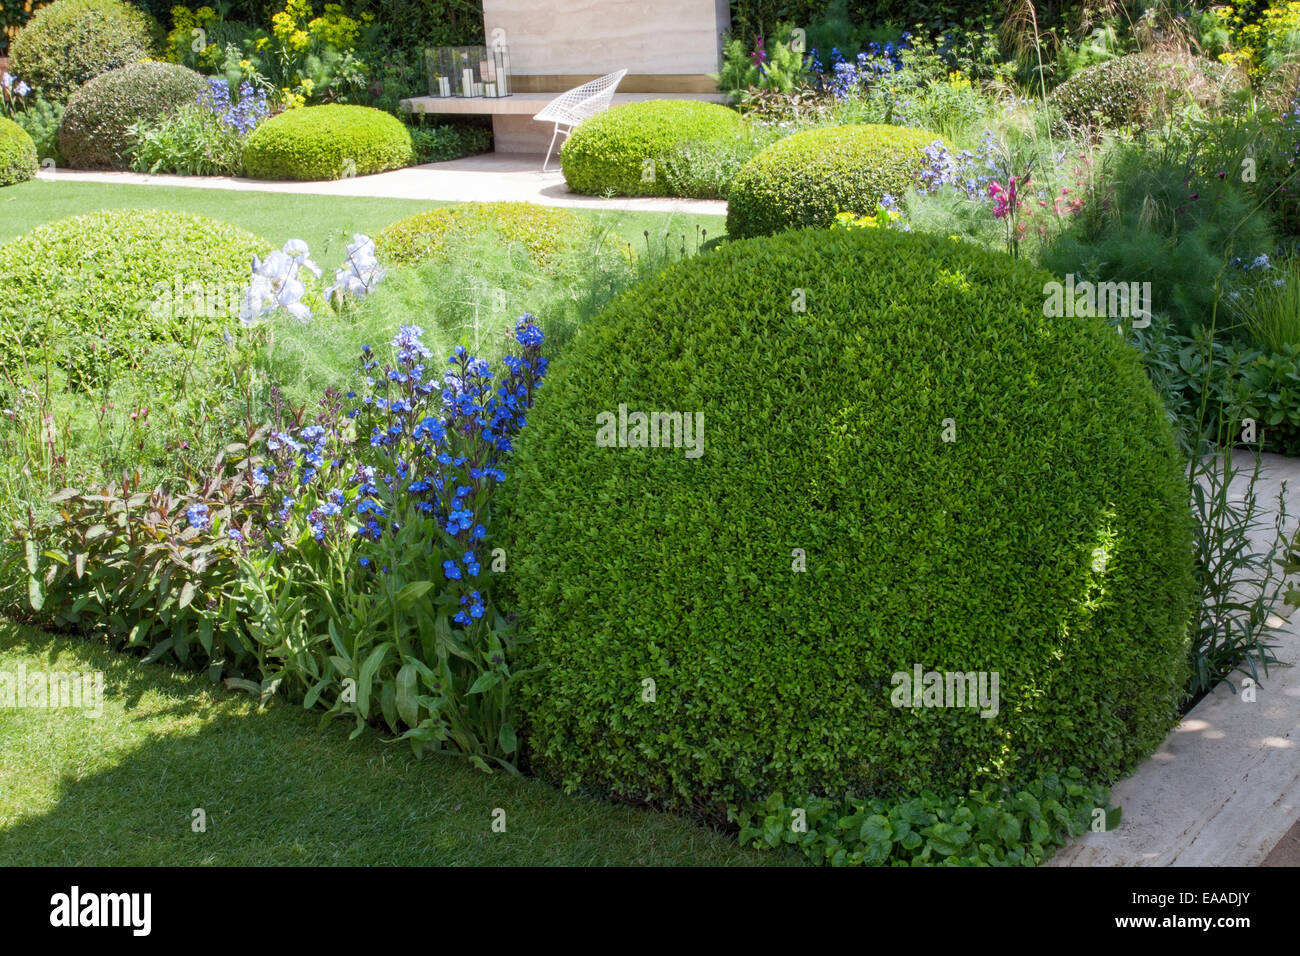 Chelsea Flower Show 2014  Clipped box (buxus) balls punctuating herbaceous perennial planting. Lawns and small patio Stock Photo